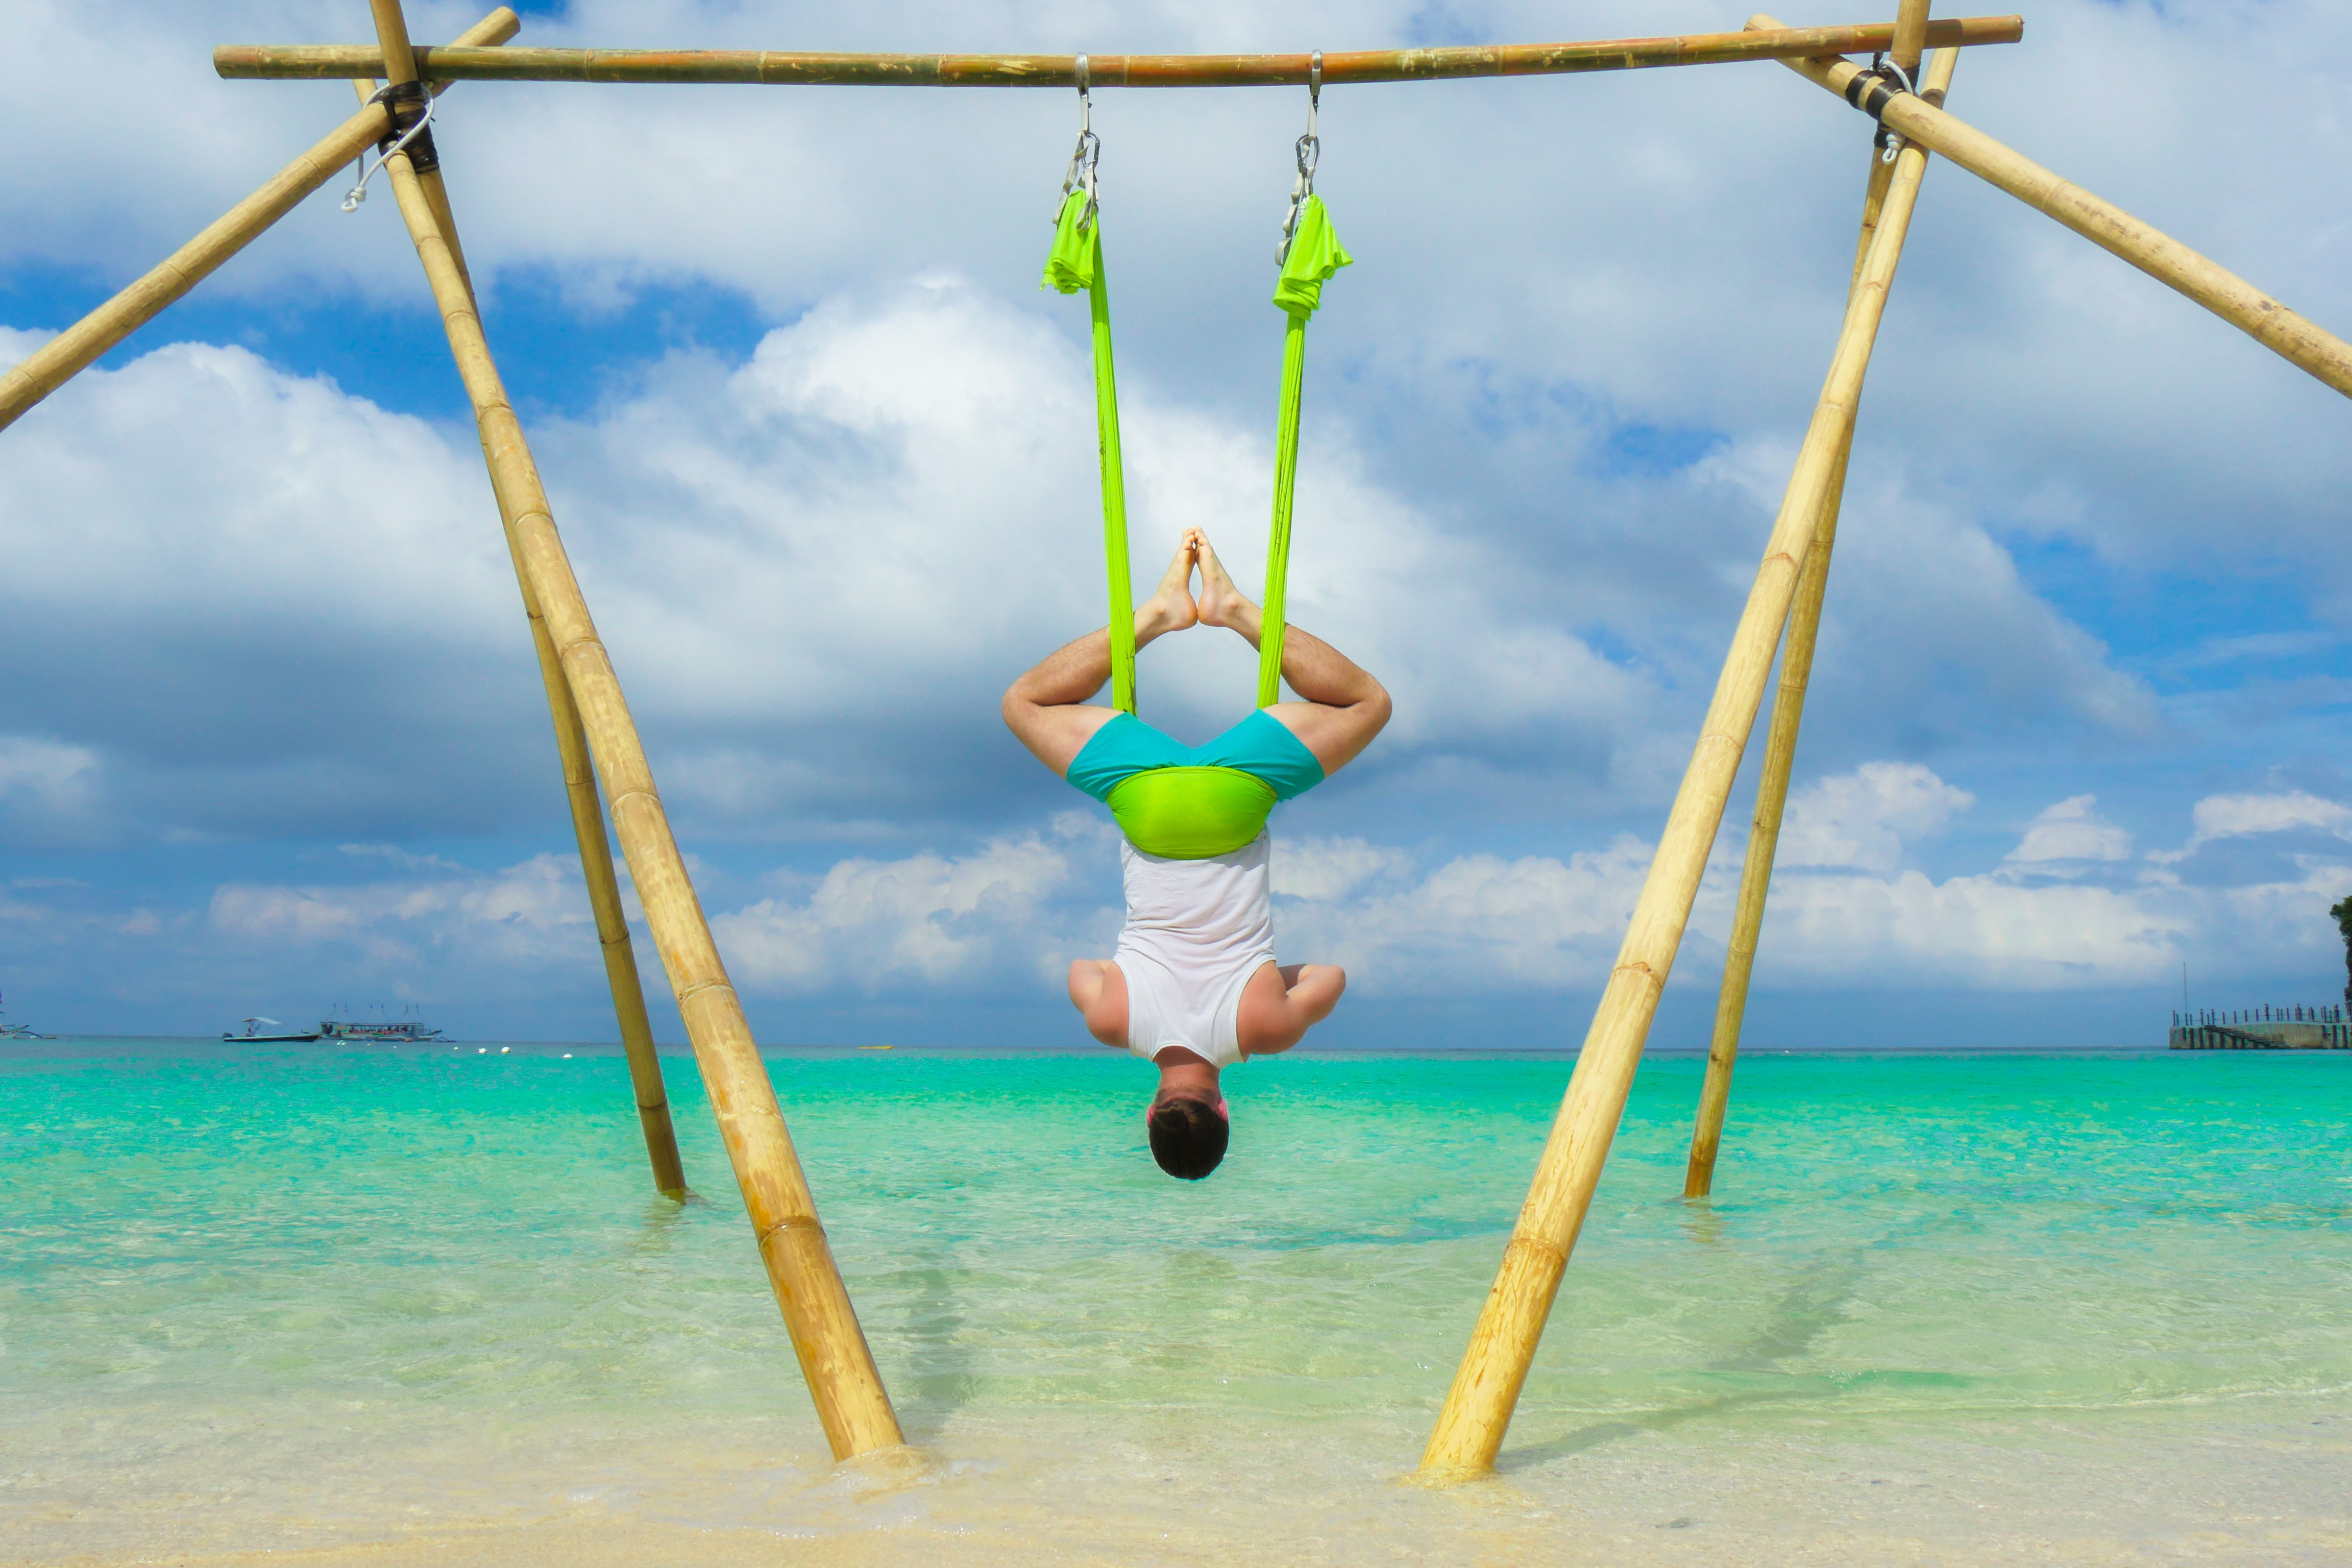 It’s not clear who first practised yoga while in a silk hammock, but the idea is to perform traditional yoga moves or aerial adaptations of them in the air using the hammock for support – and yogis swear by it